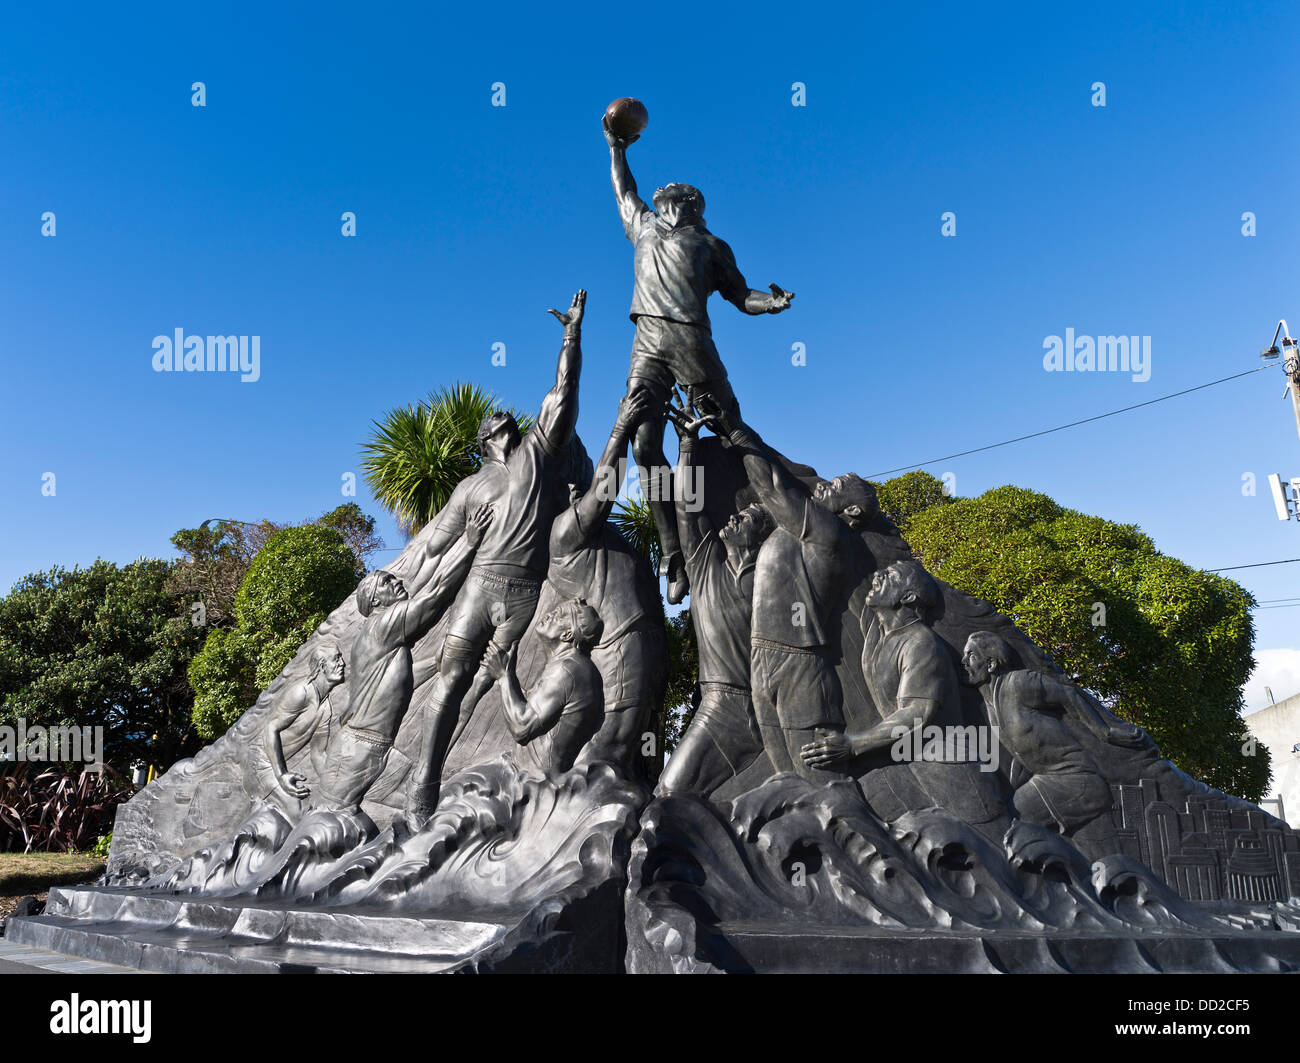 dh Lambton Harbour WELLINGTON NEW ZEALAND Rugby World Cup Celebration statue Stock Photo